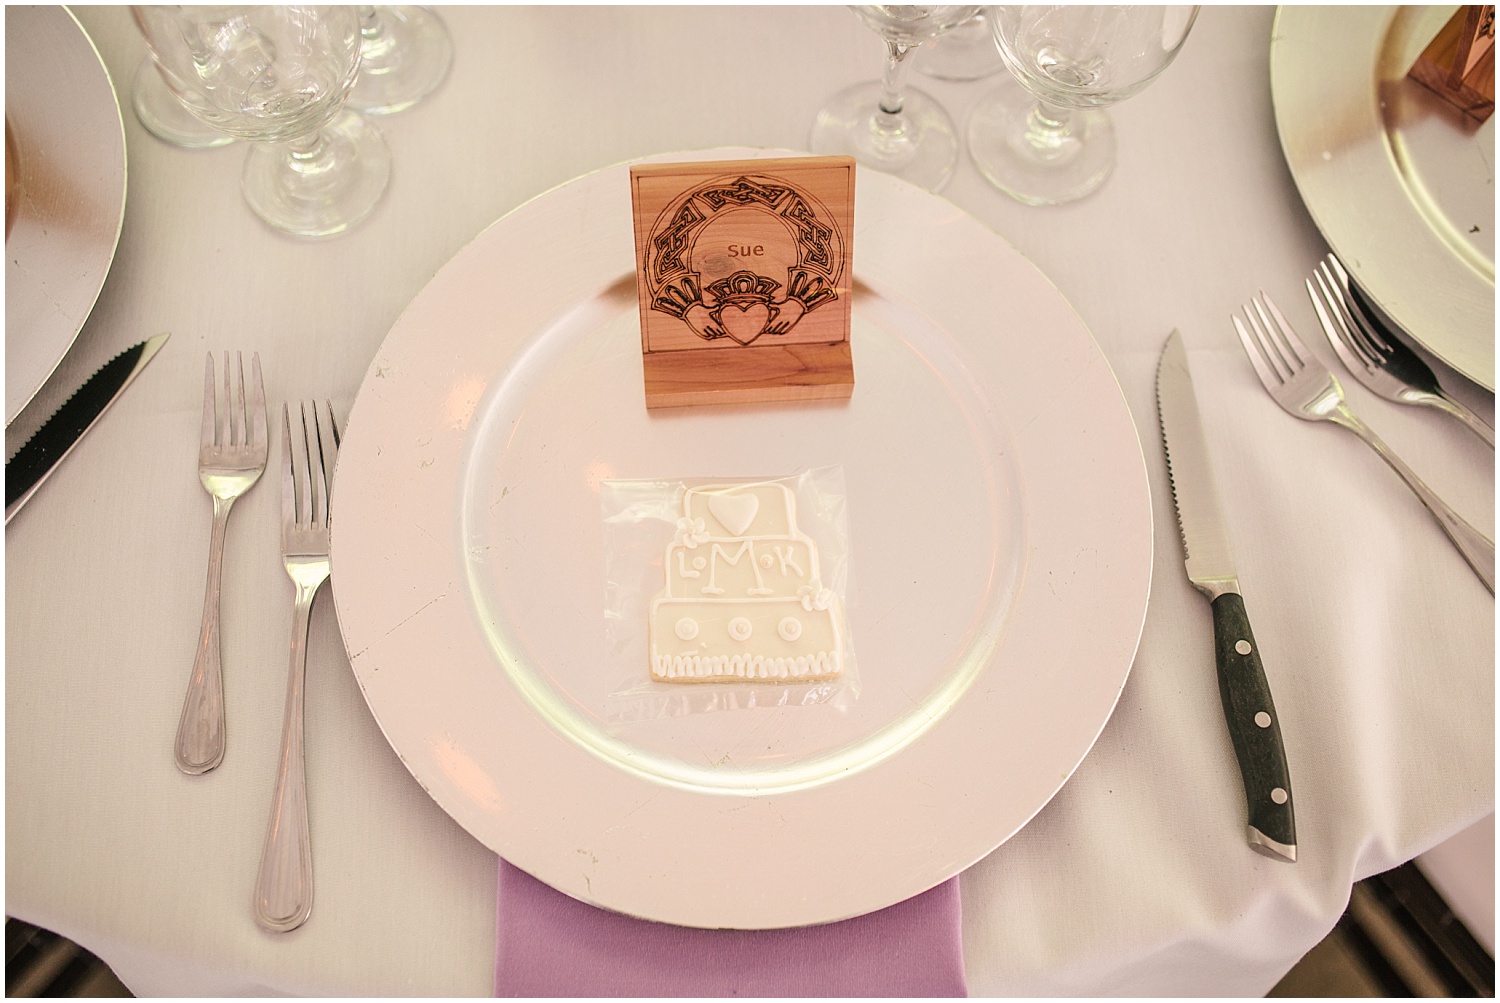 Jefferson Street Mansion wedding reception details featuring custom wood place cards